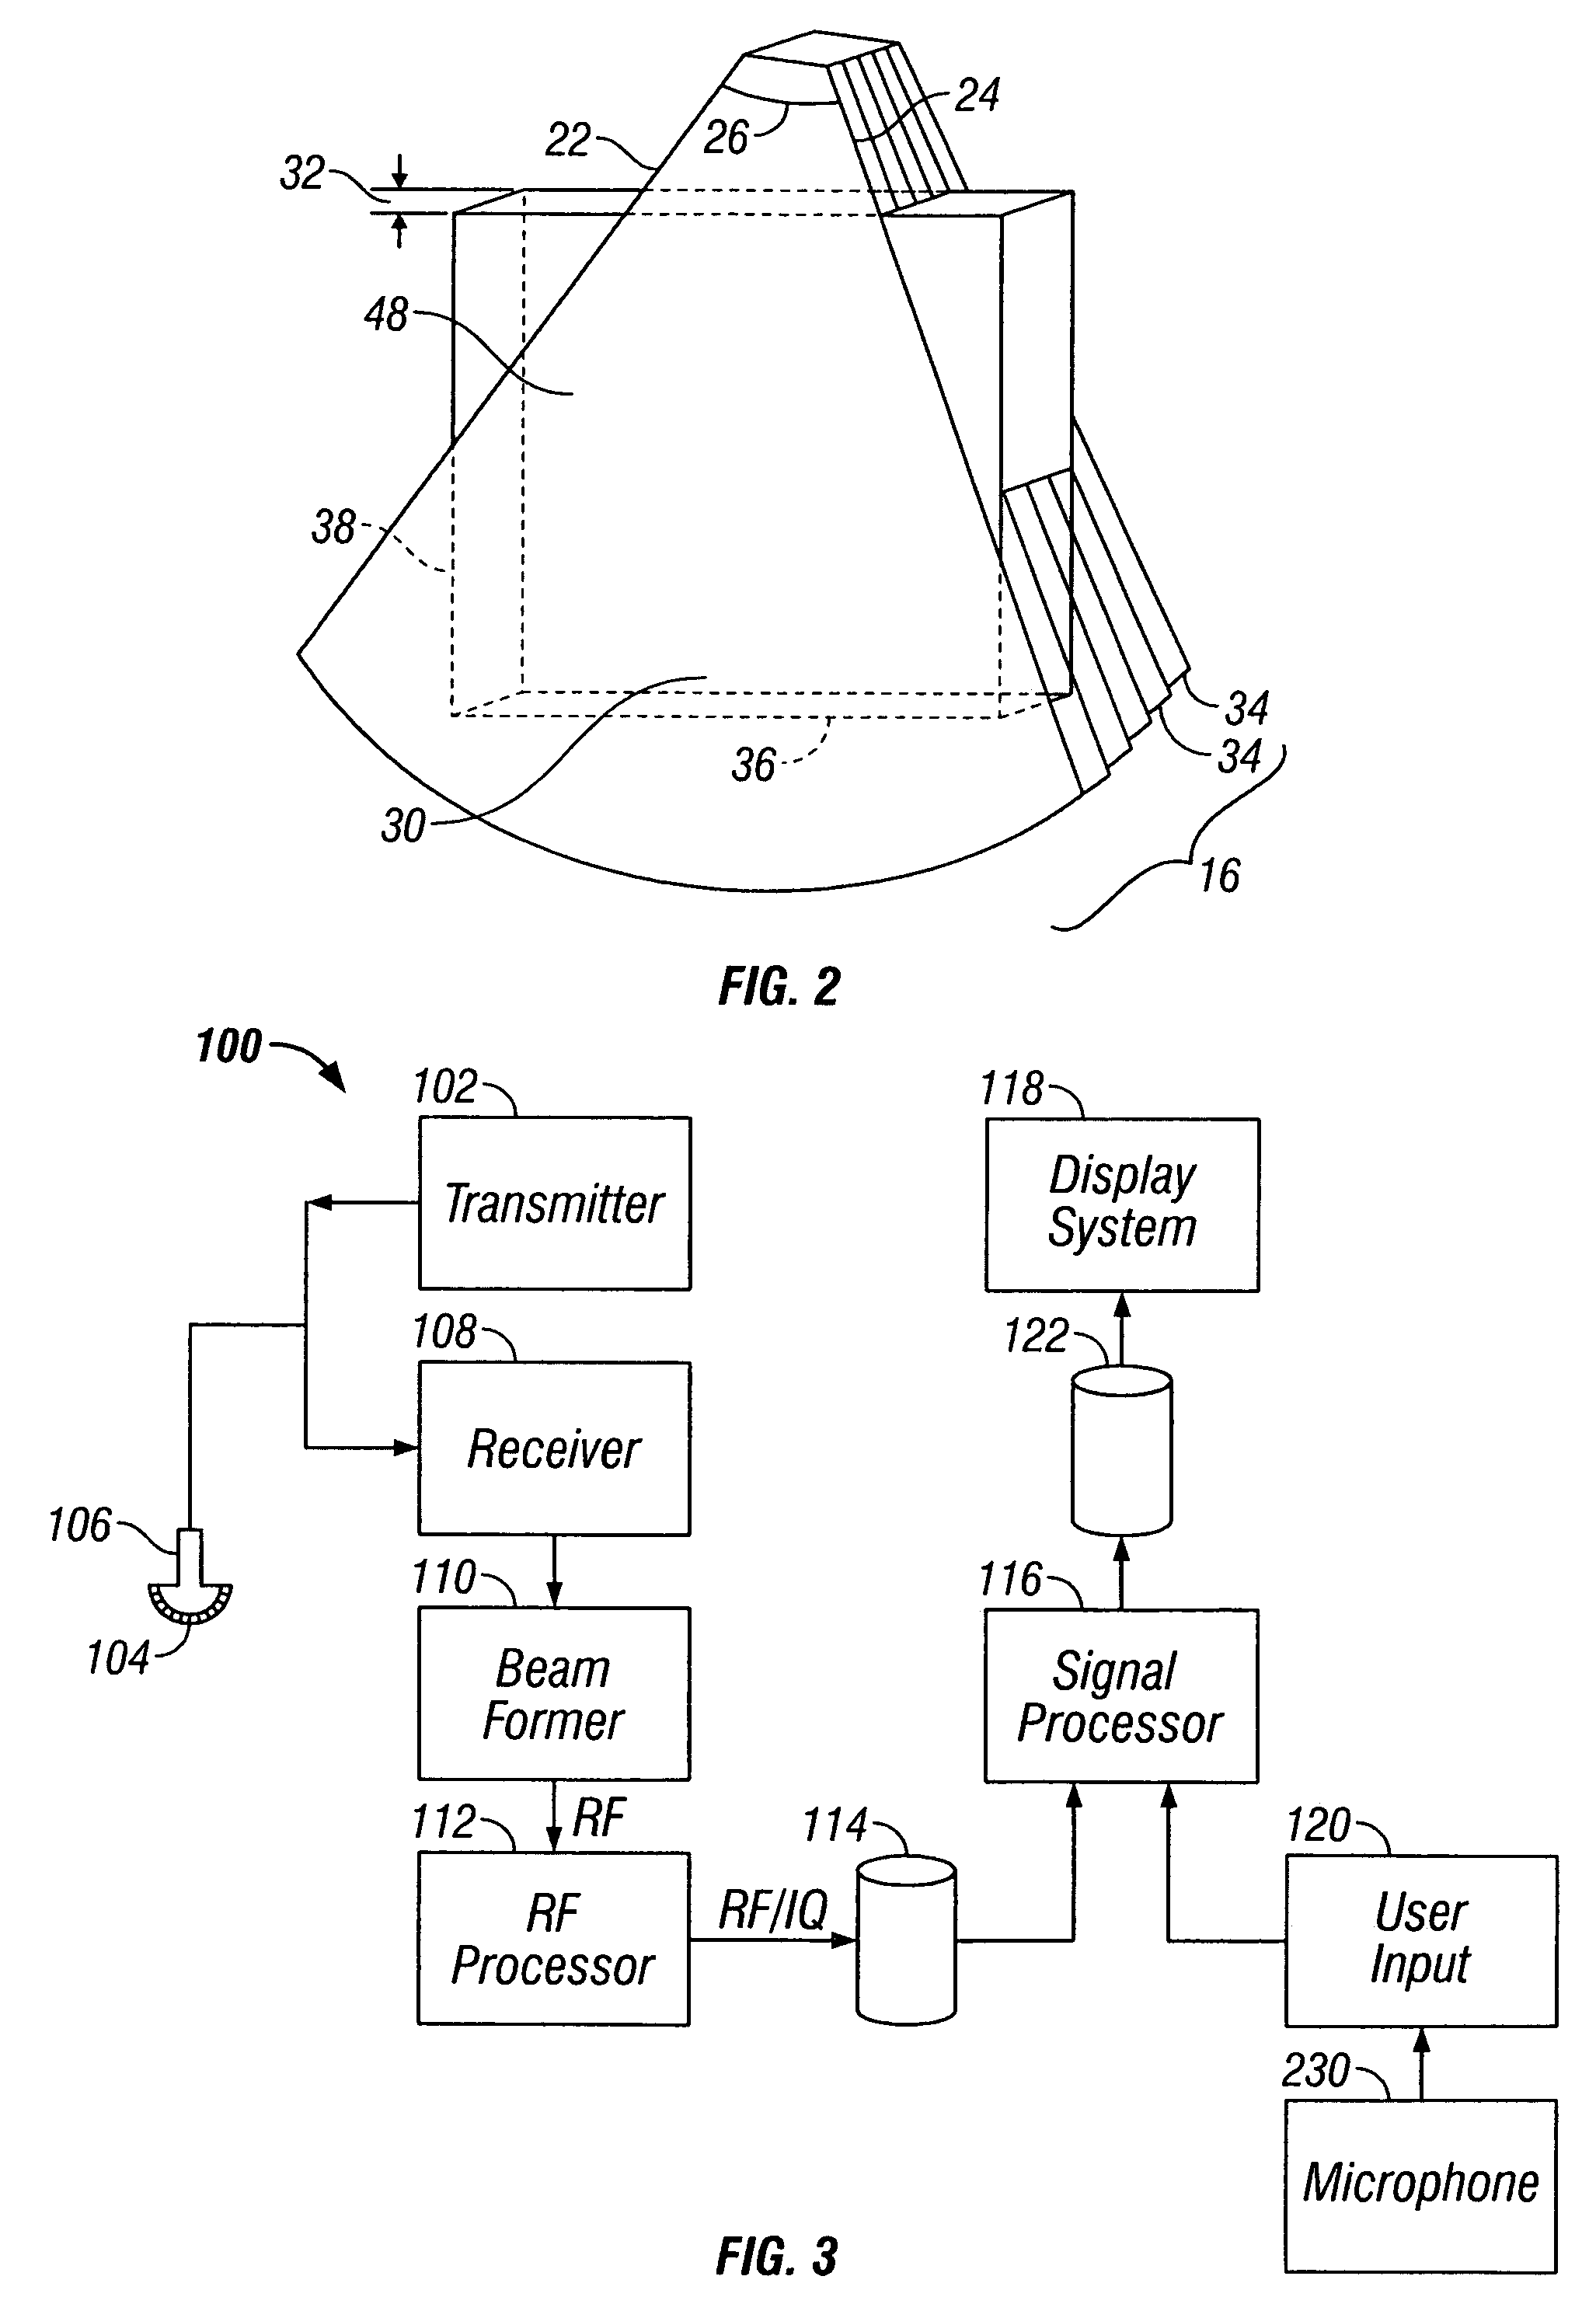 Method and apparatus for controlling ultrasound systems